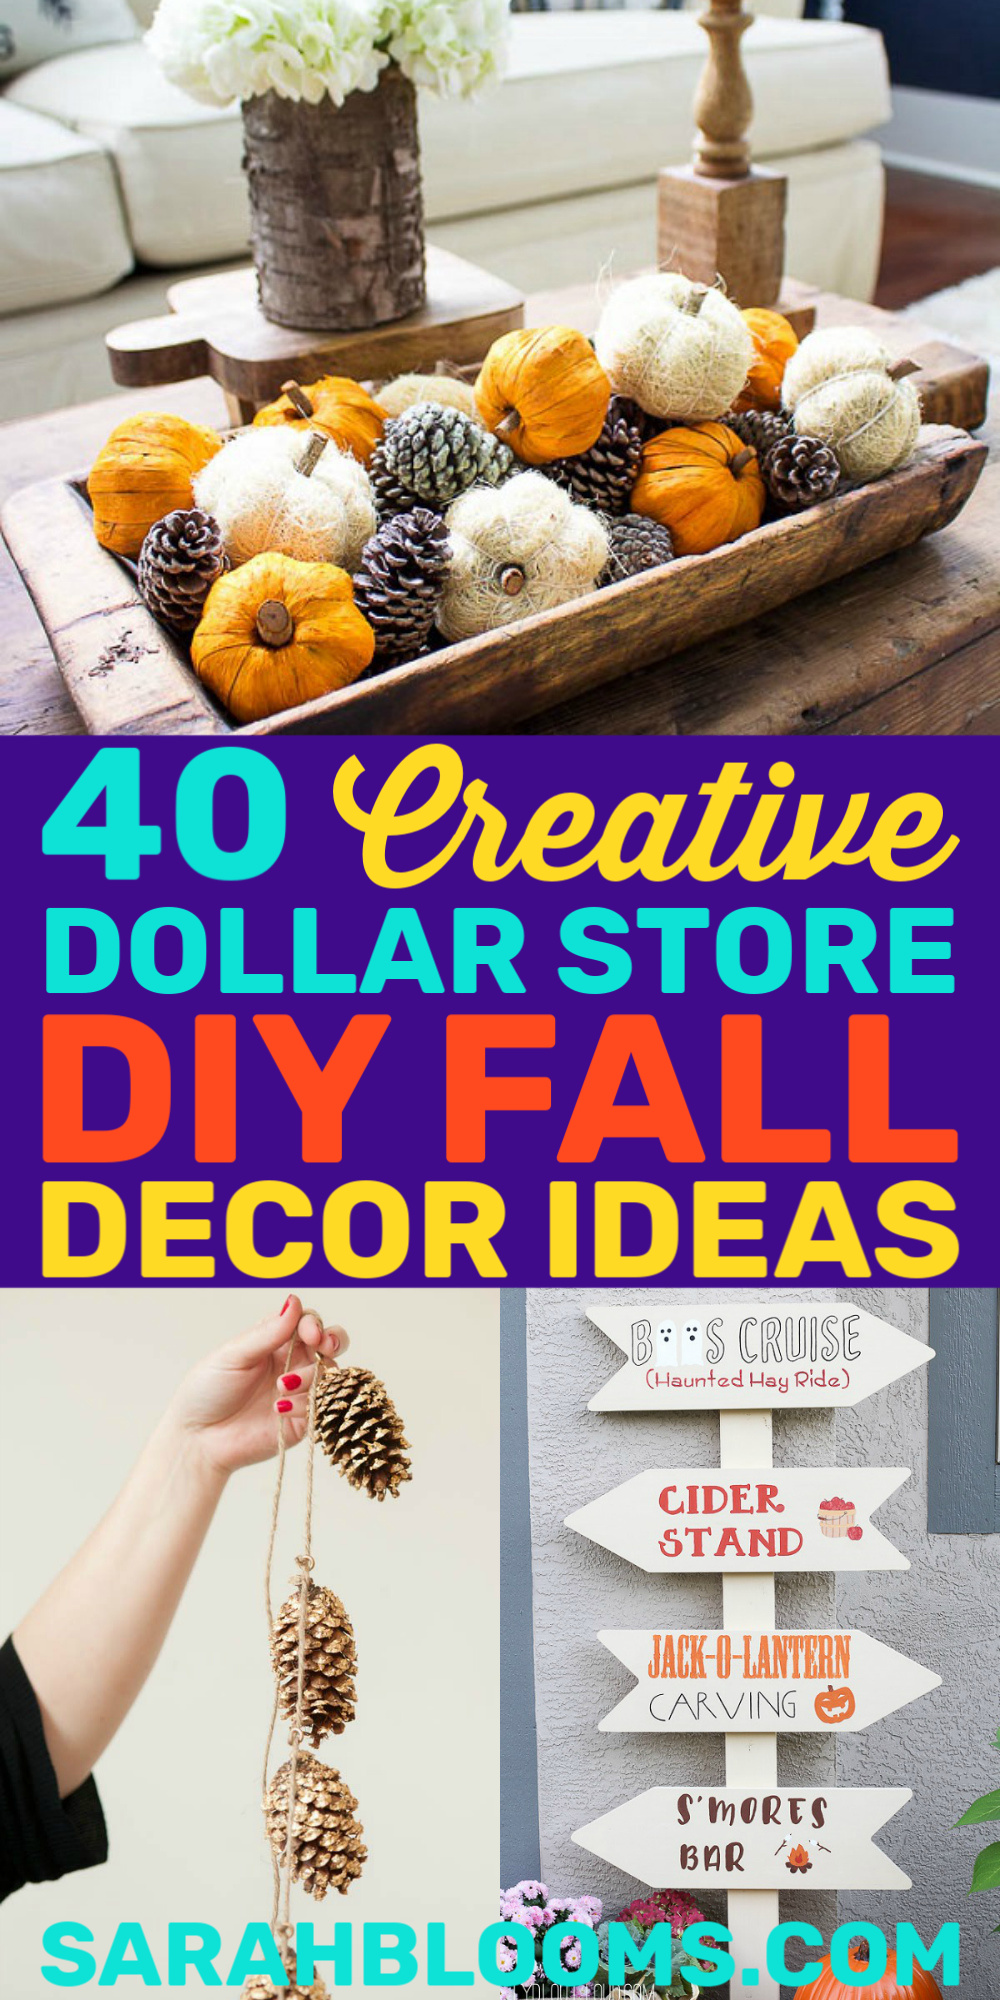 Check out these Must-See DIY Fall Decor Ideas you can make for cheap with items from the dollar store! #dollarstore #dollarstorediy #diyfall #diyprojects #falldecor #diycrafts